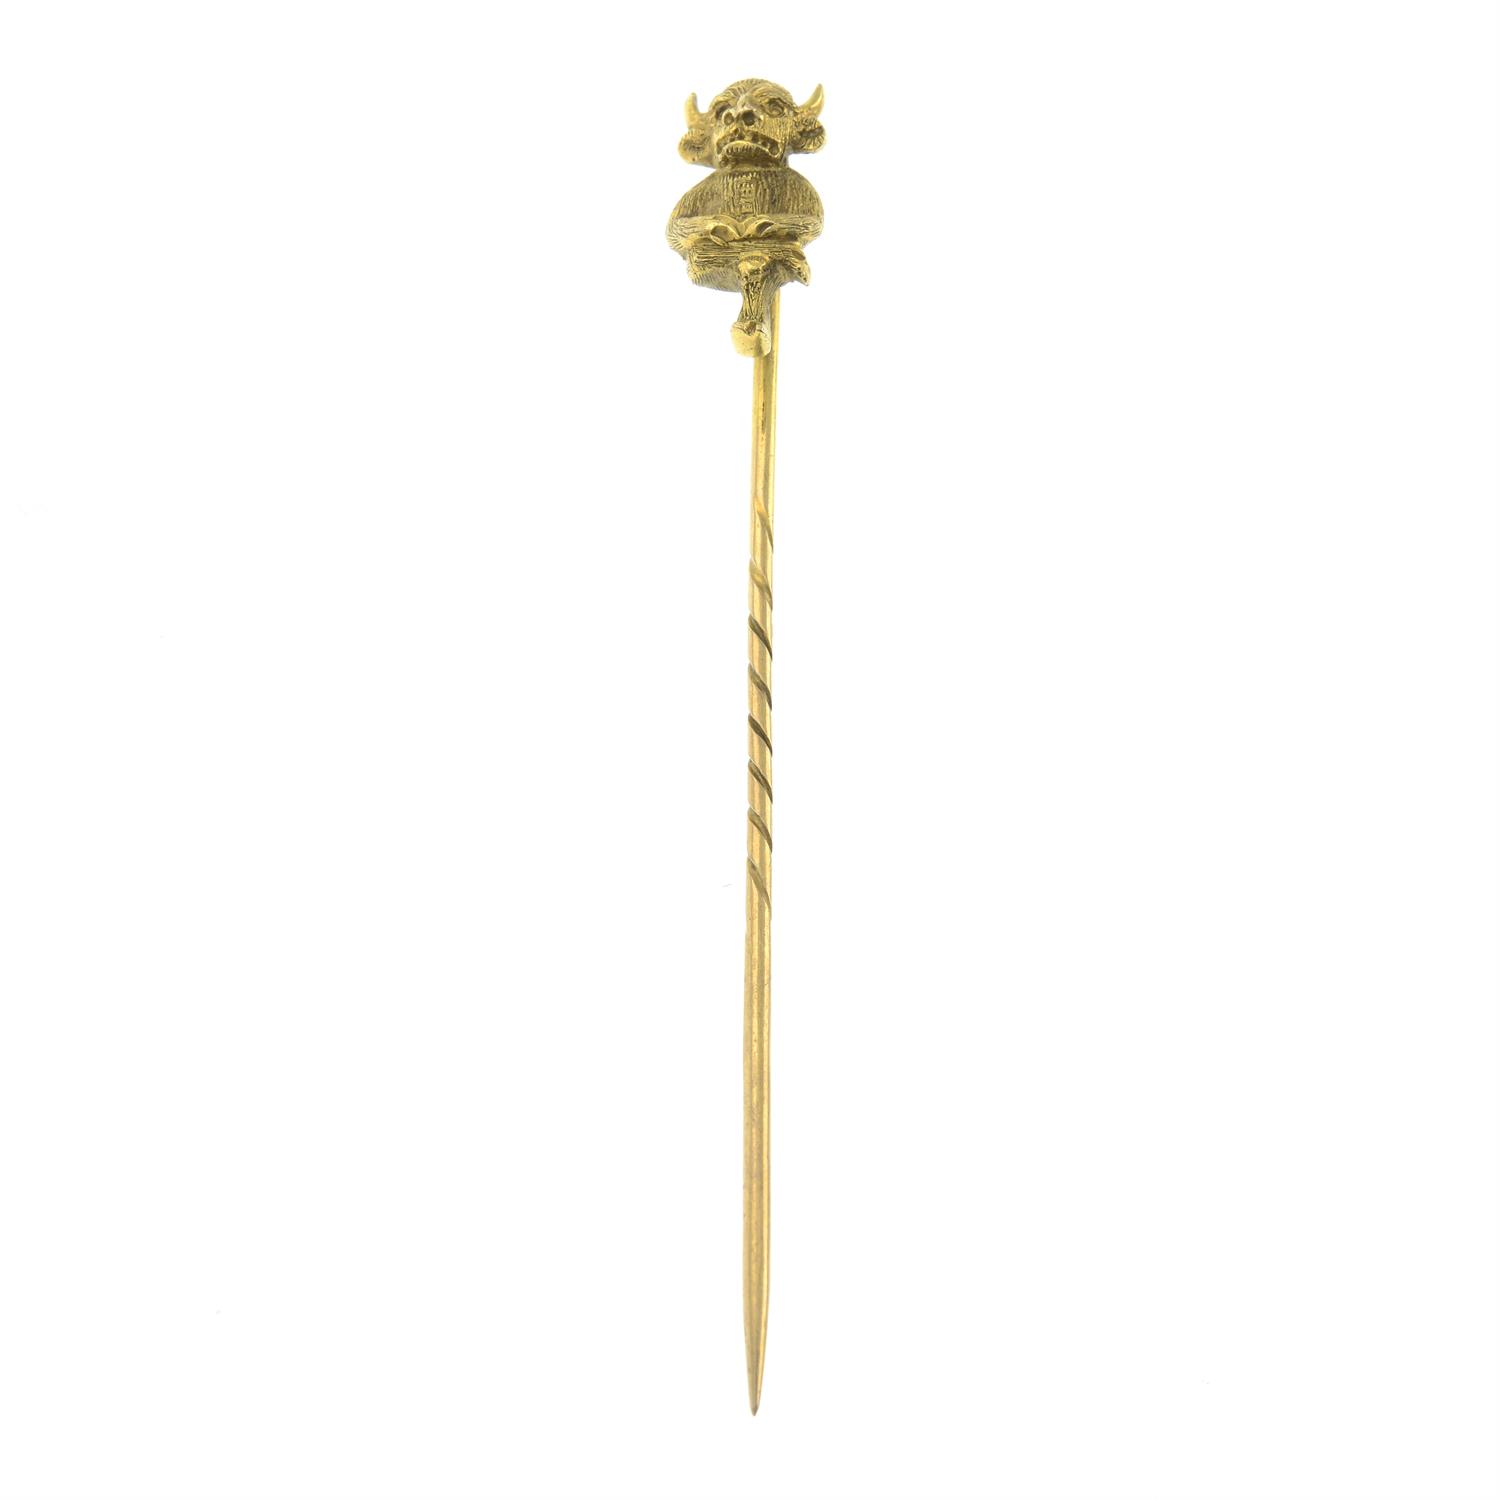 An early 20th century 9ct gold Lincoln Imp stick pin.